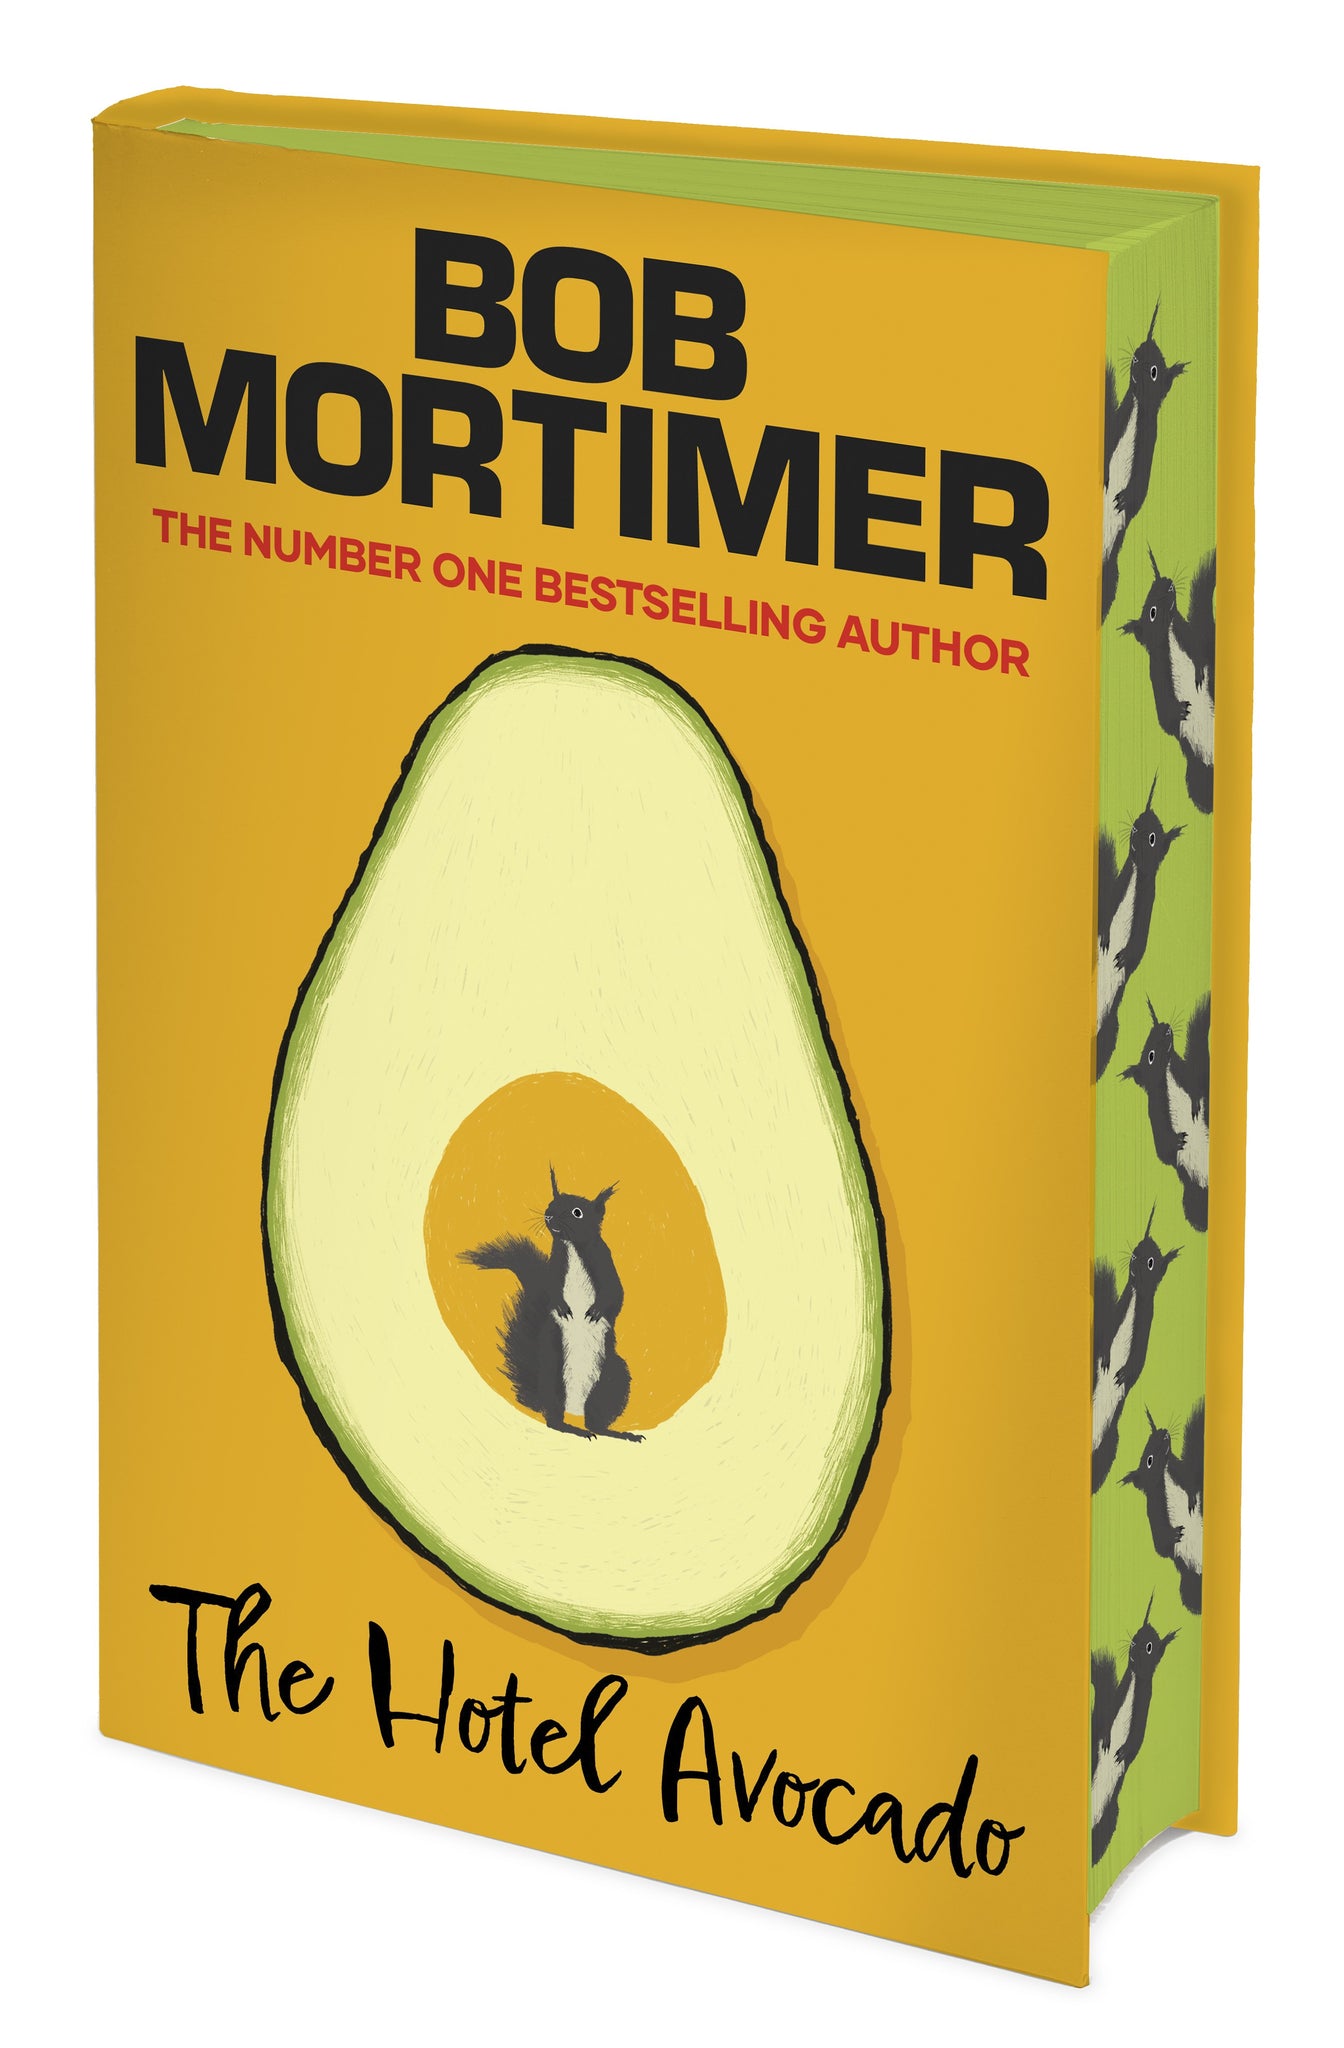 PRE-ORDER The Hotel Avocado by Bob Mortimer (Indie Signed edition)